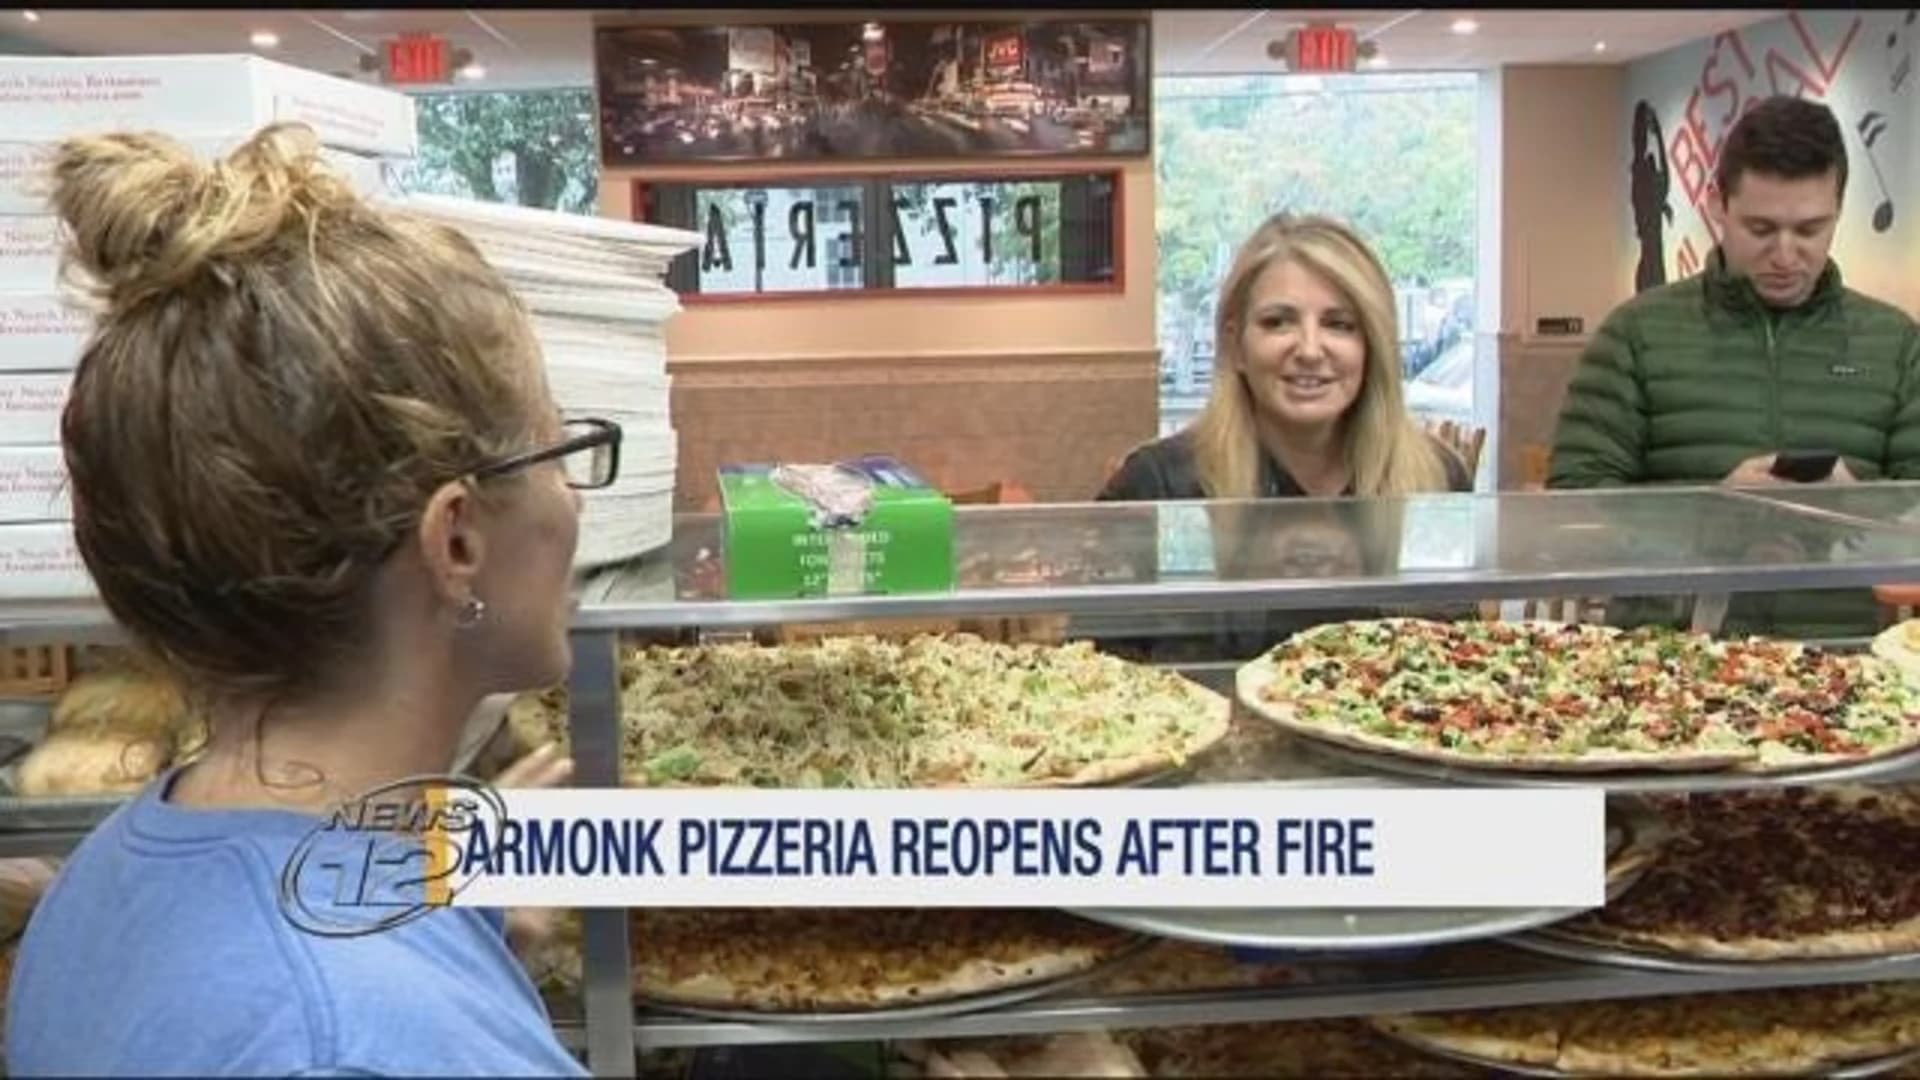 Popular pizza shop reopens in Armonk after fire